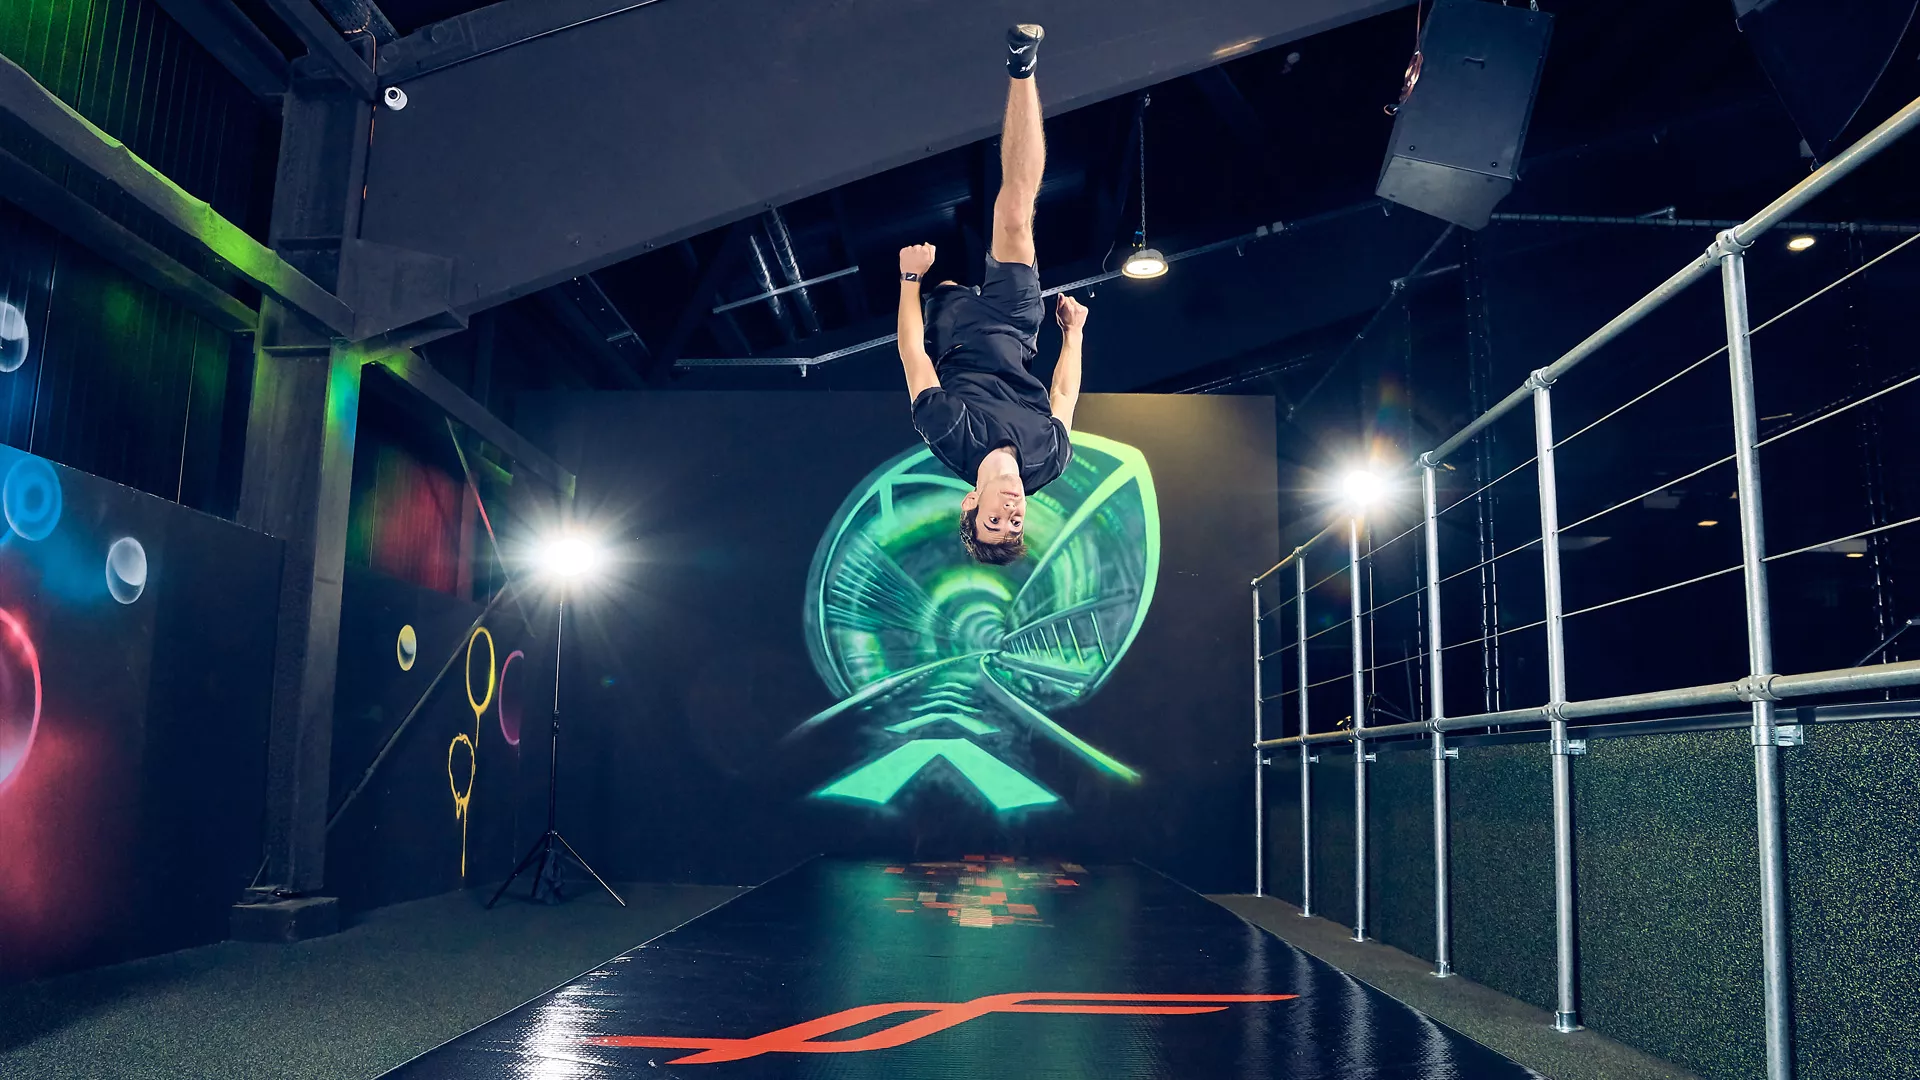  Trampoline Parks Attractions - Air Track